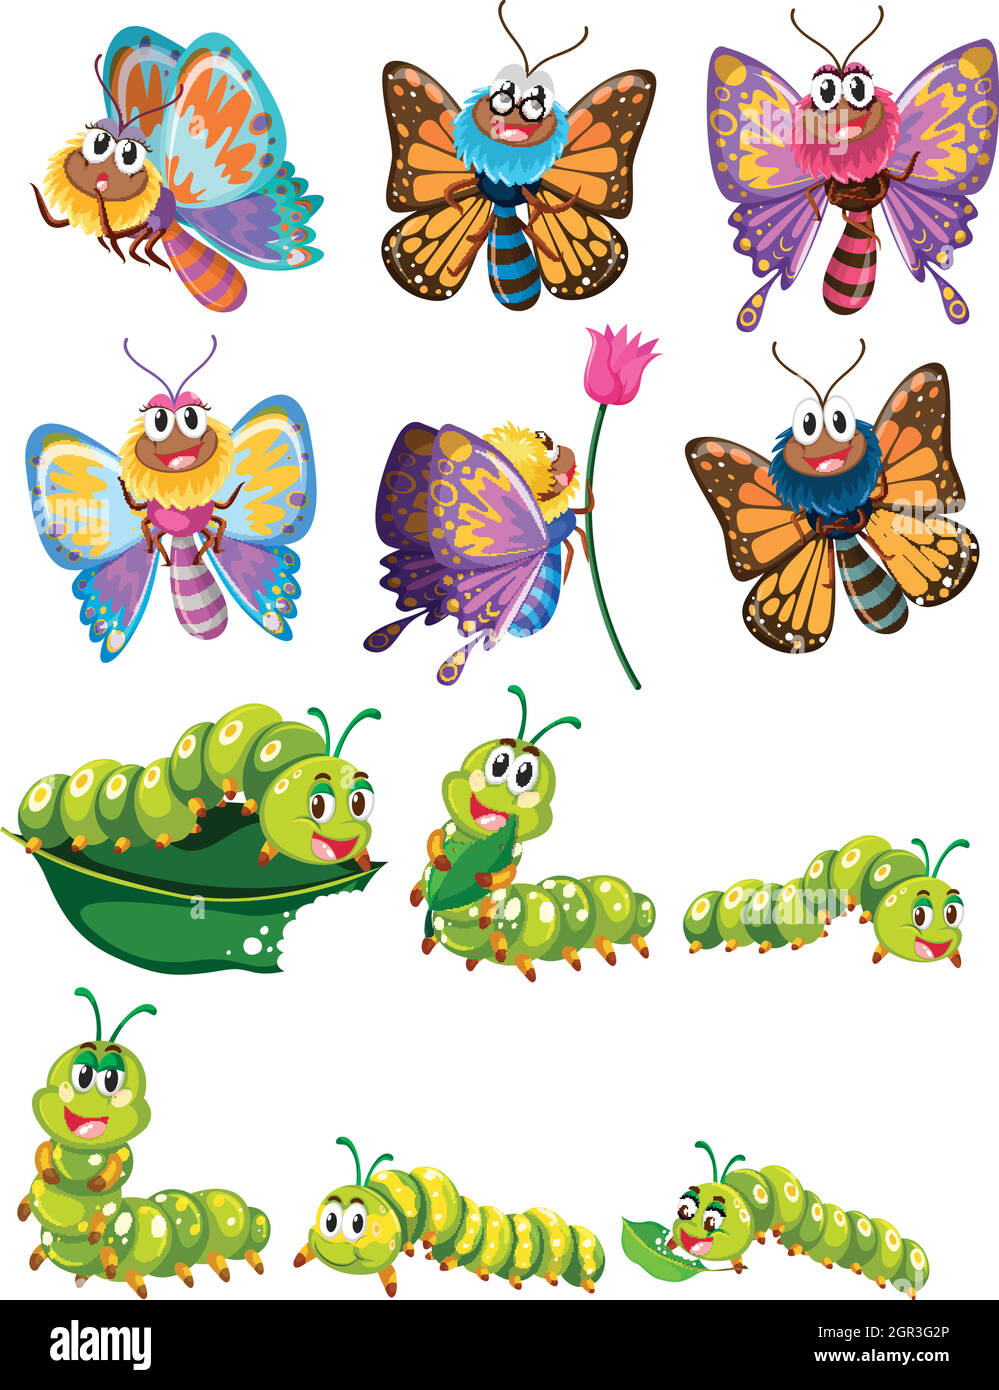 Caterpillars and butterflies with colorful wings Stock Vector